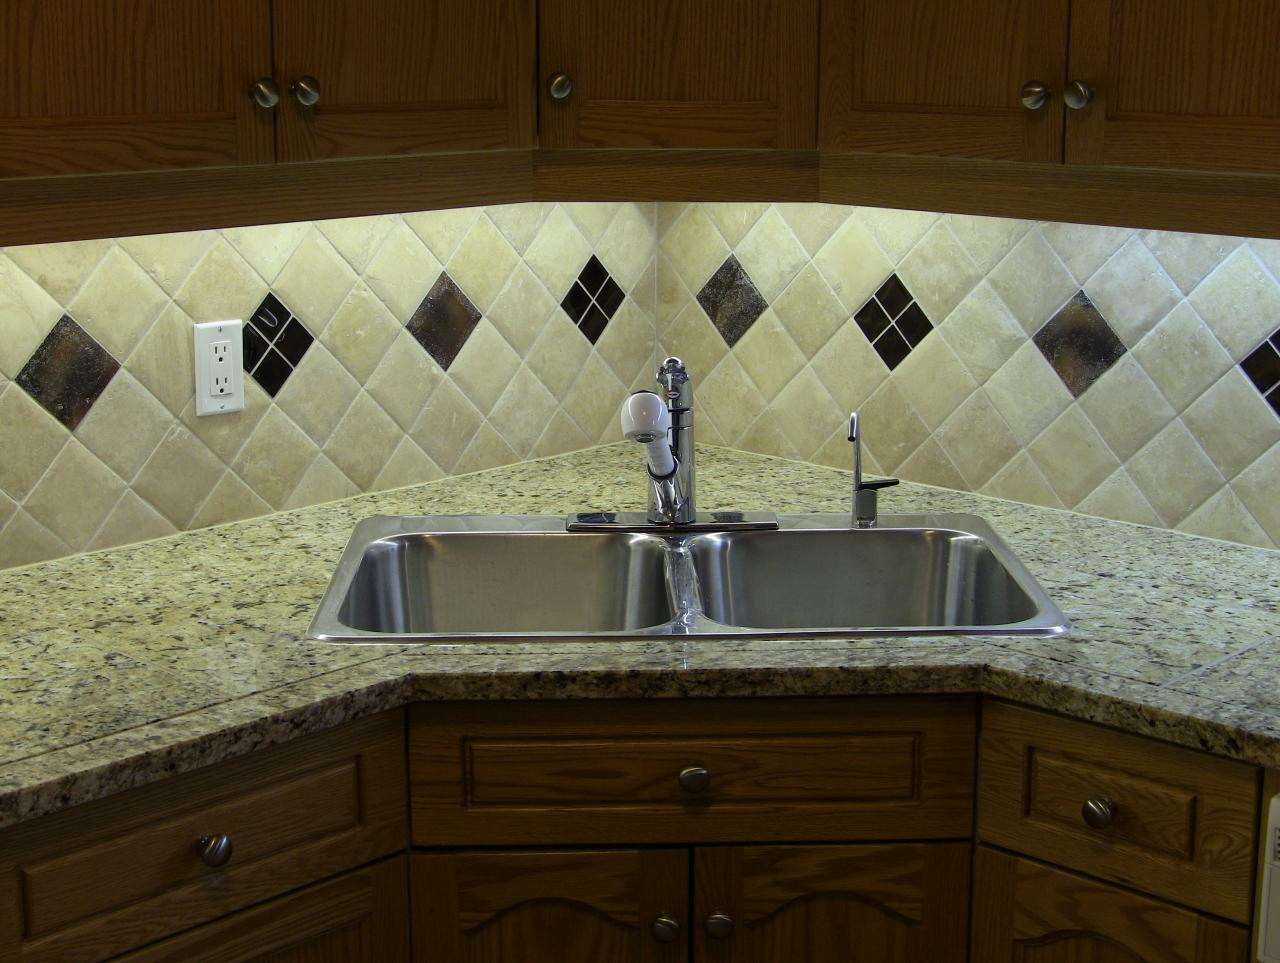 Kitchen Tiles Patterns
 TILE LAYING PATTERN WHAT WORKS THE BEST